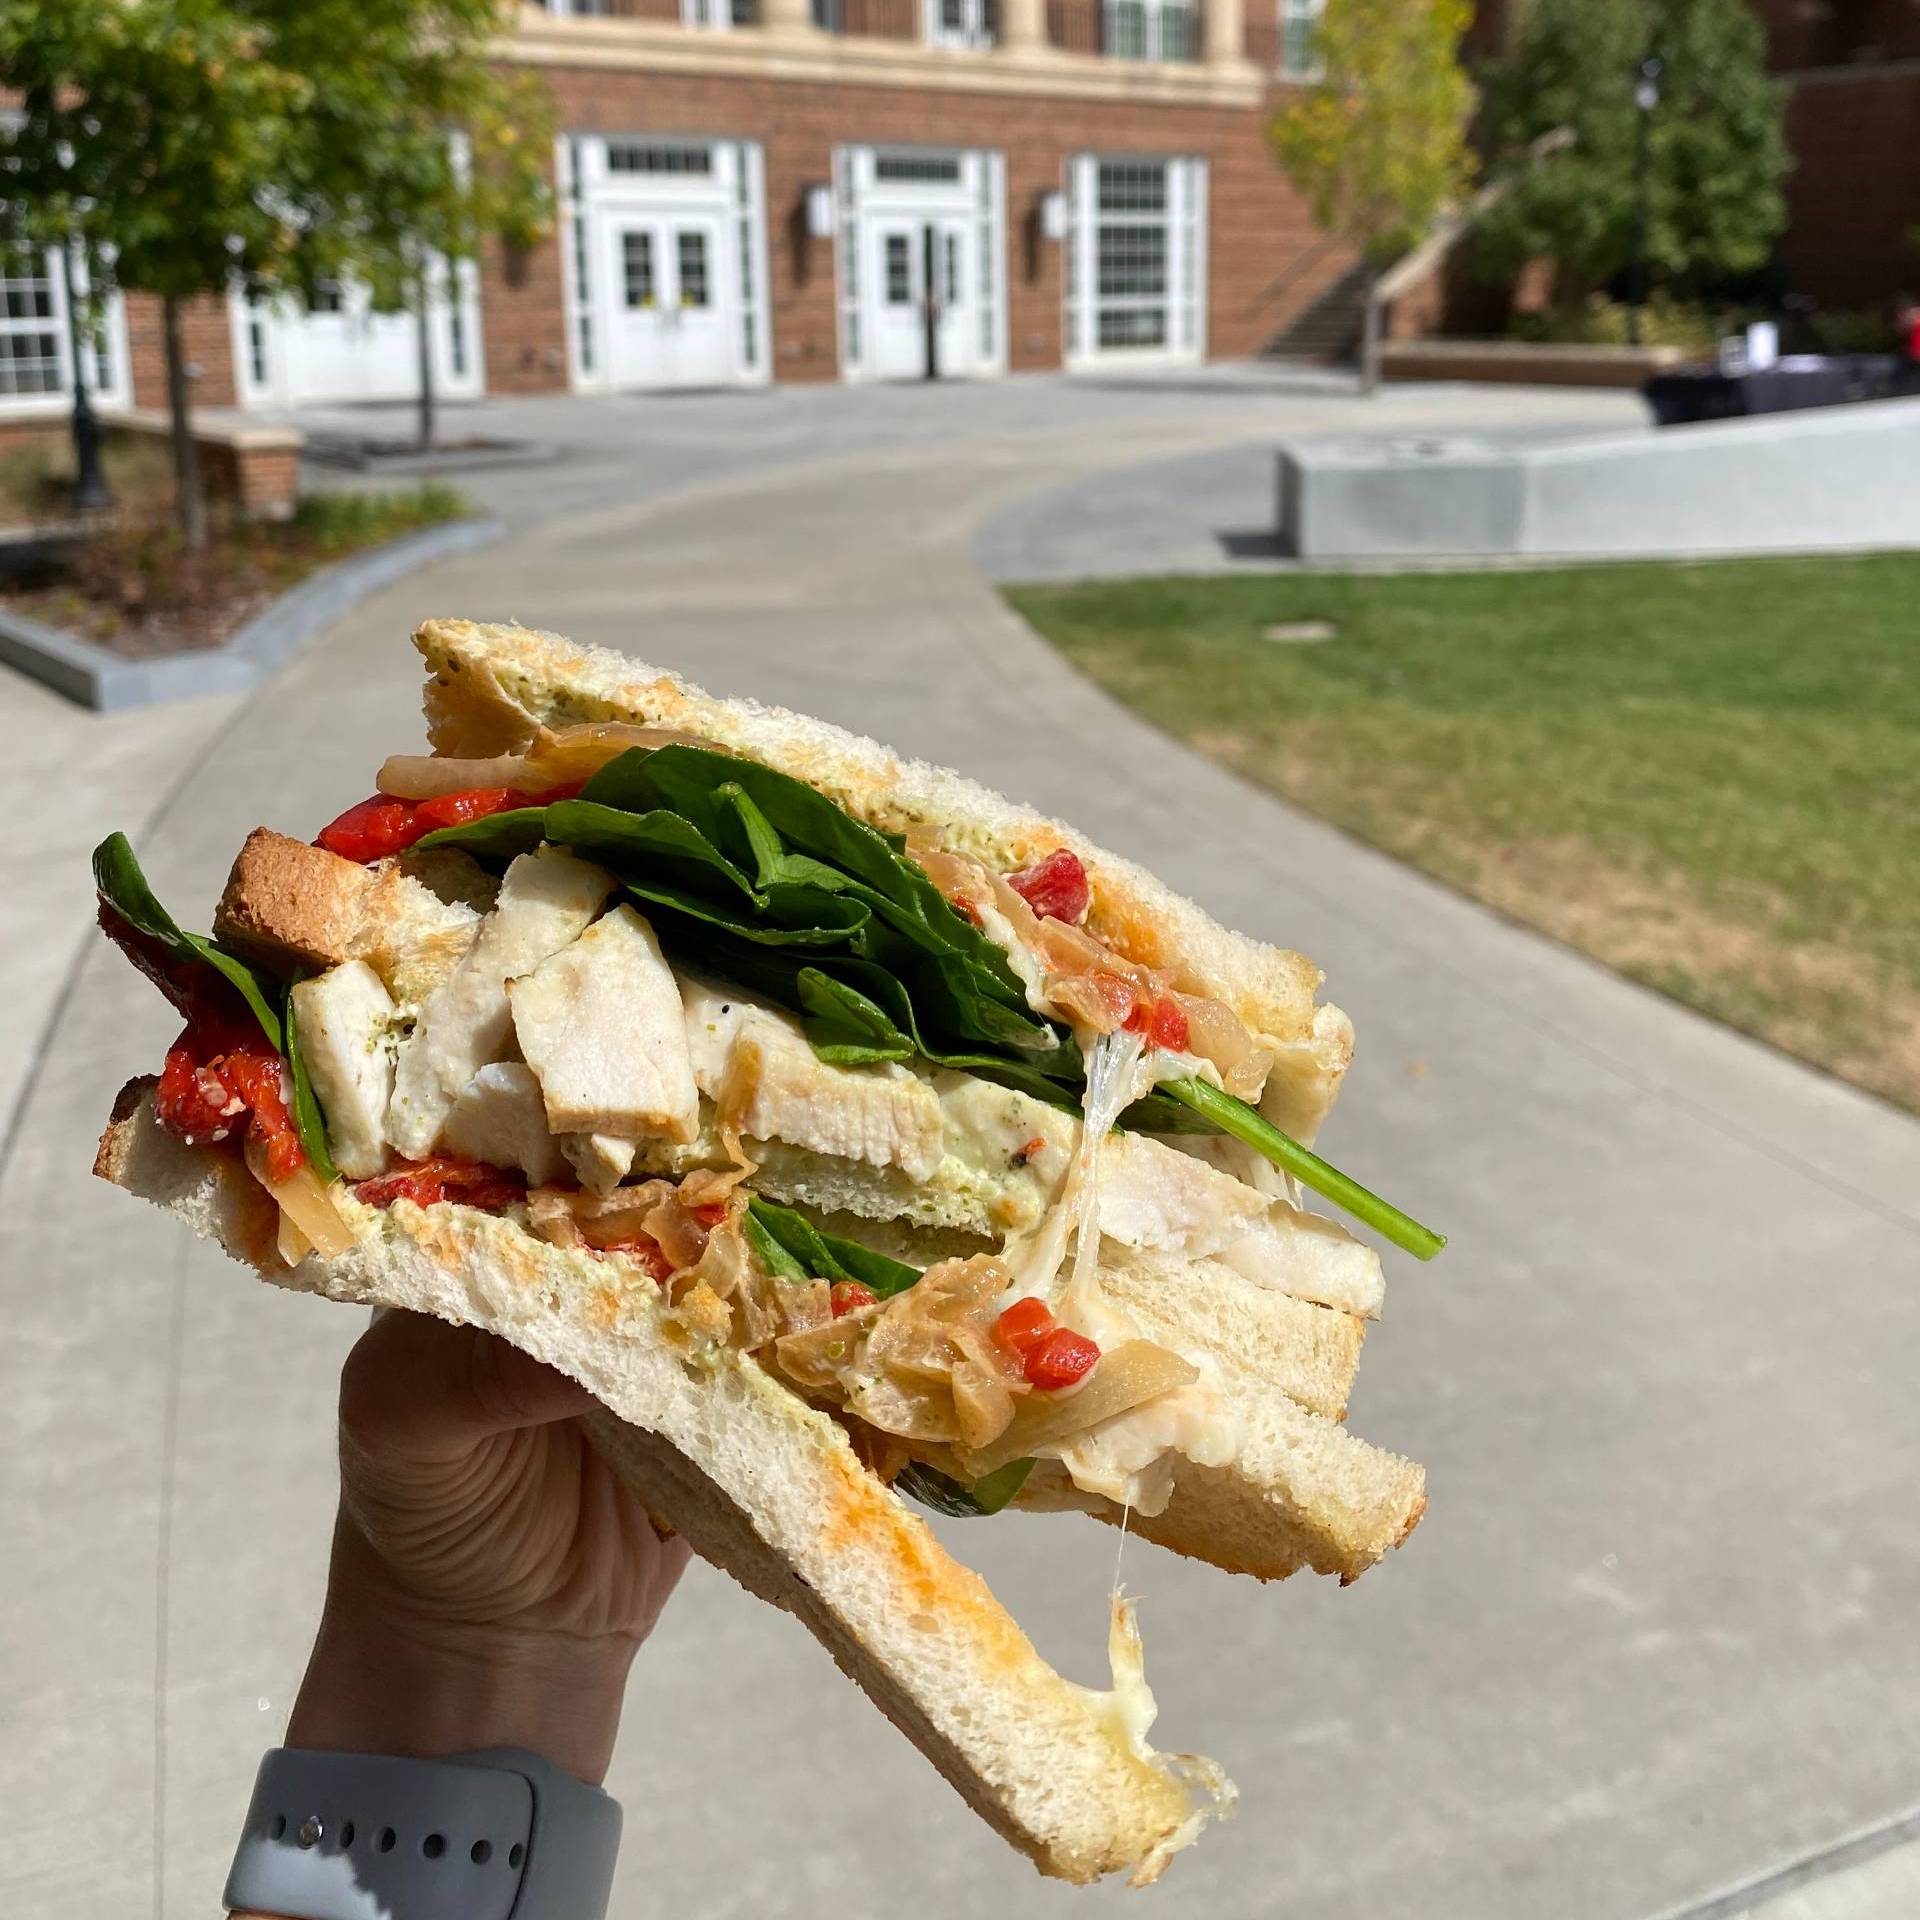 A photograph of a sandwich being held up outside of the Terry College of Business.